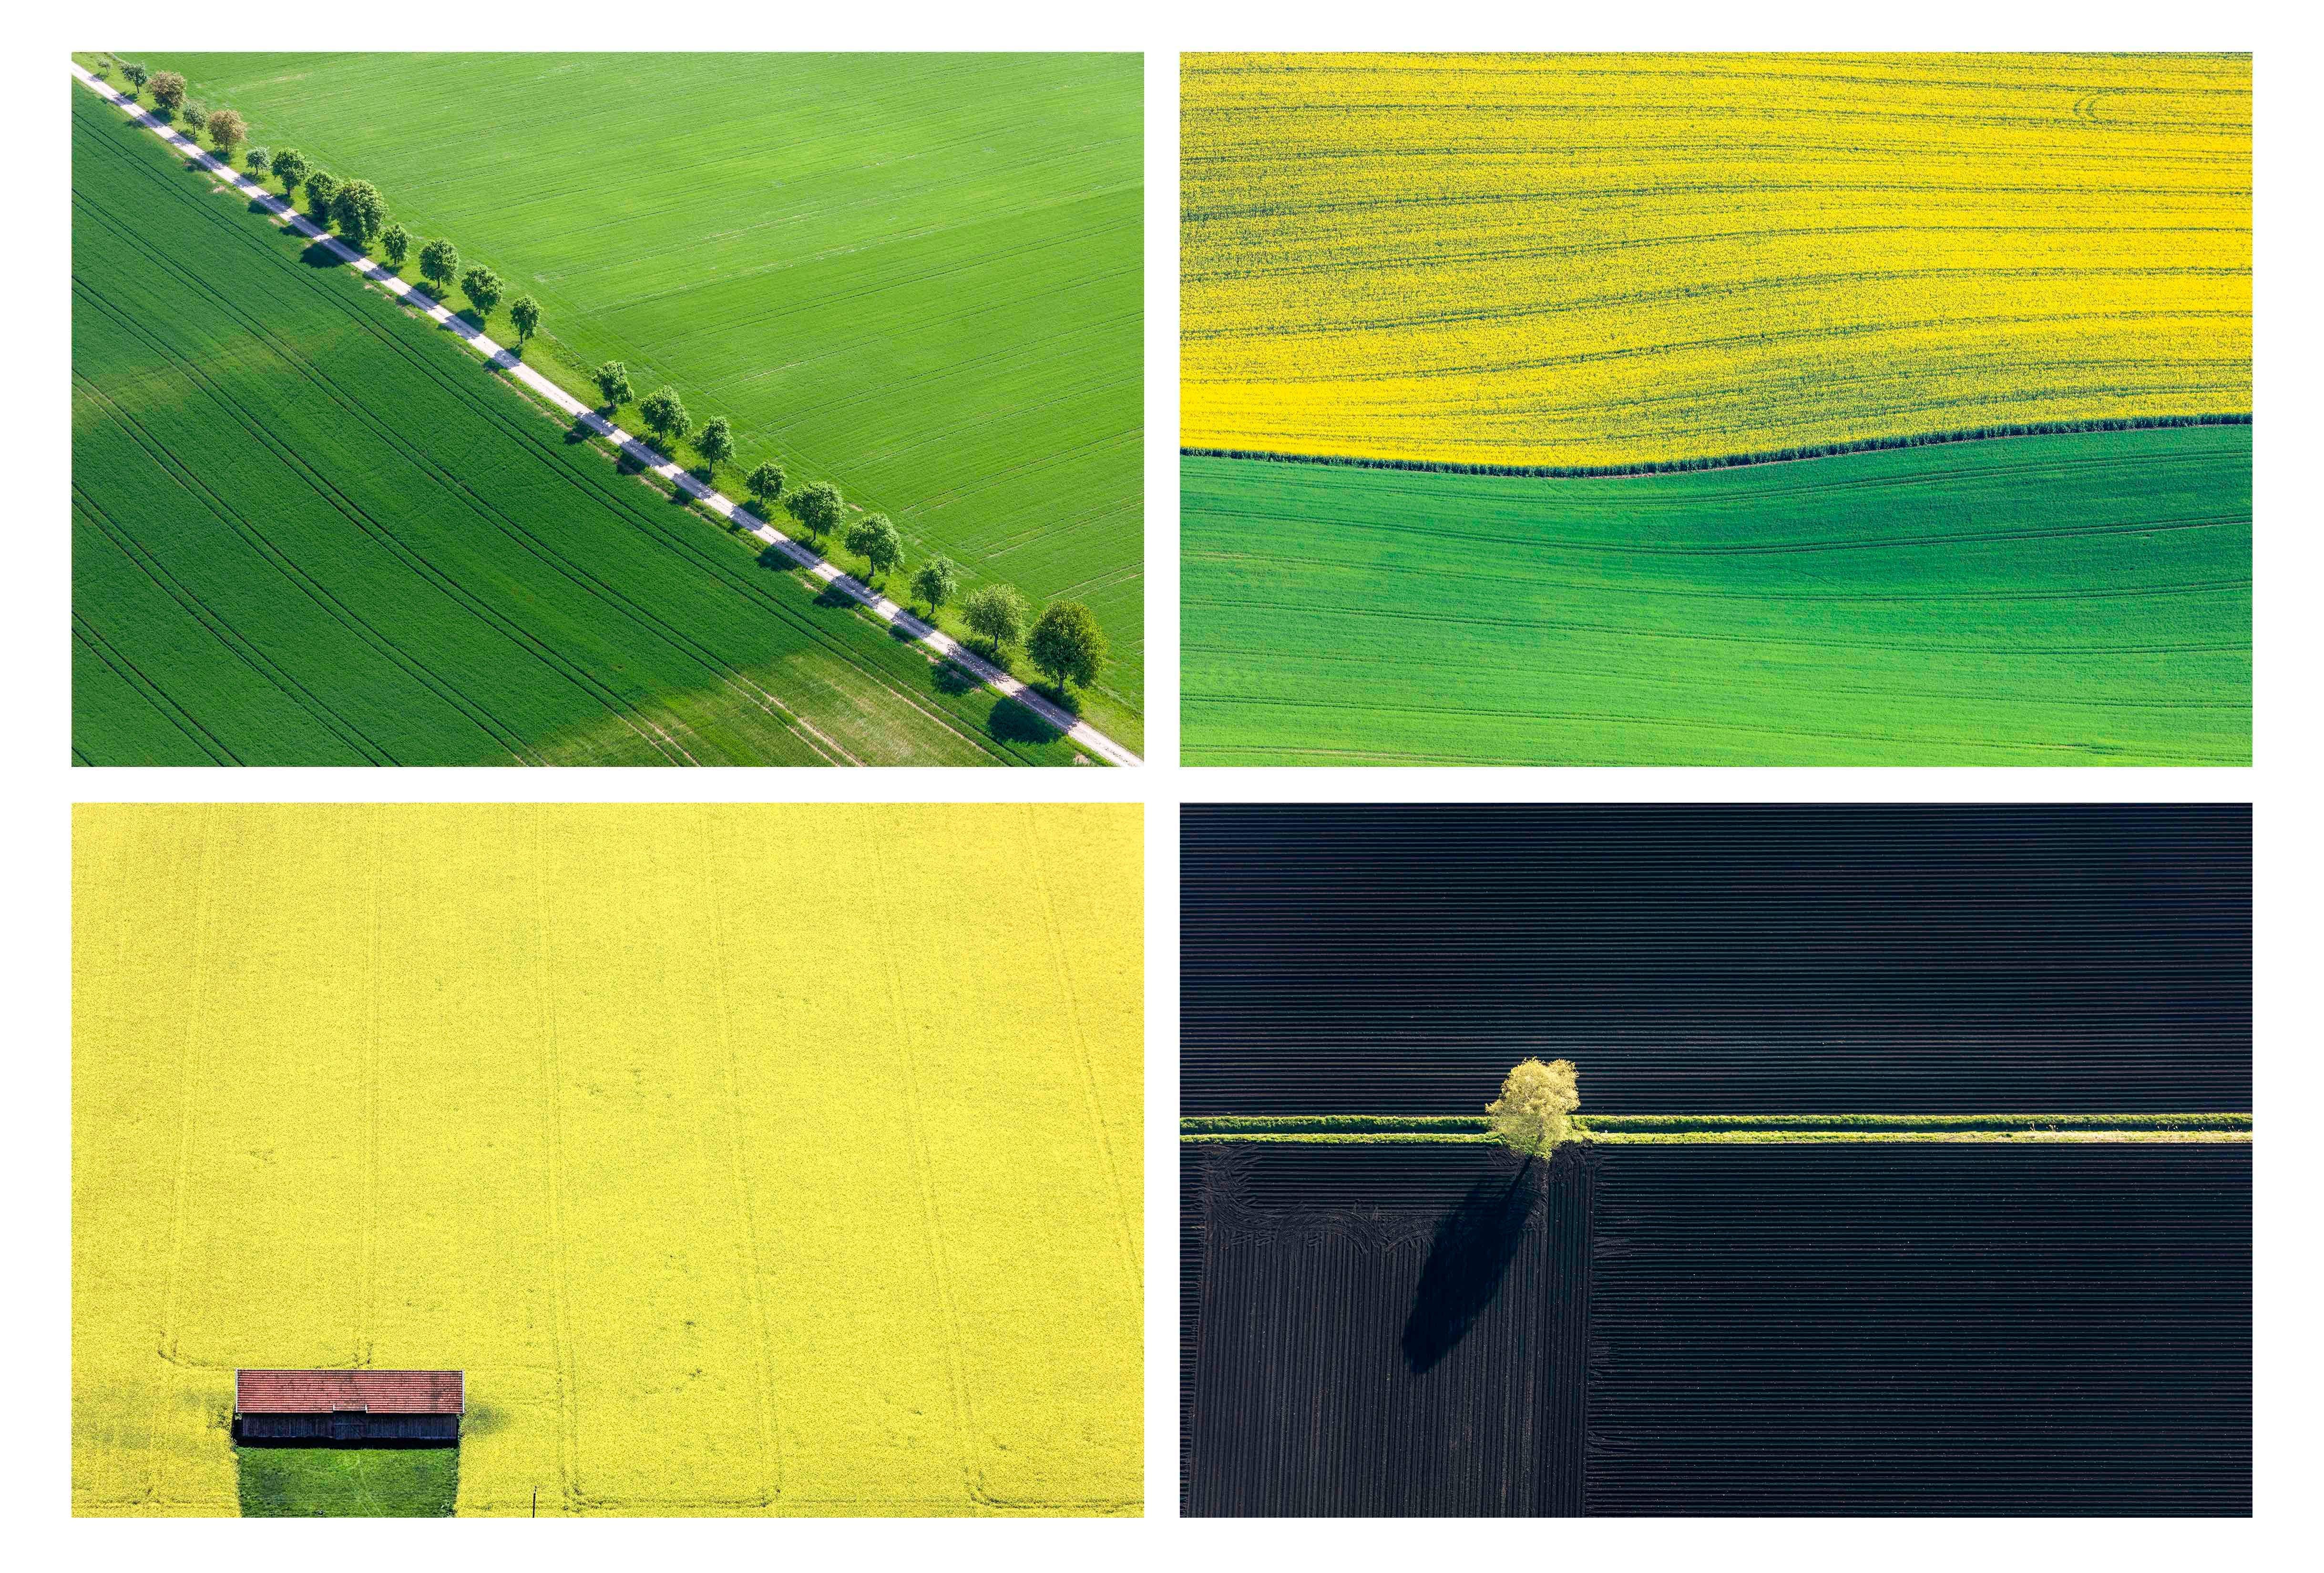 Klaus Leidorf Landscape Photograph - Nature geometric abstract I Aerial color photography